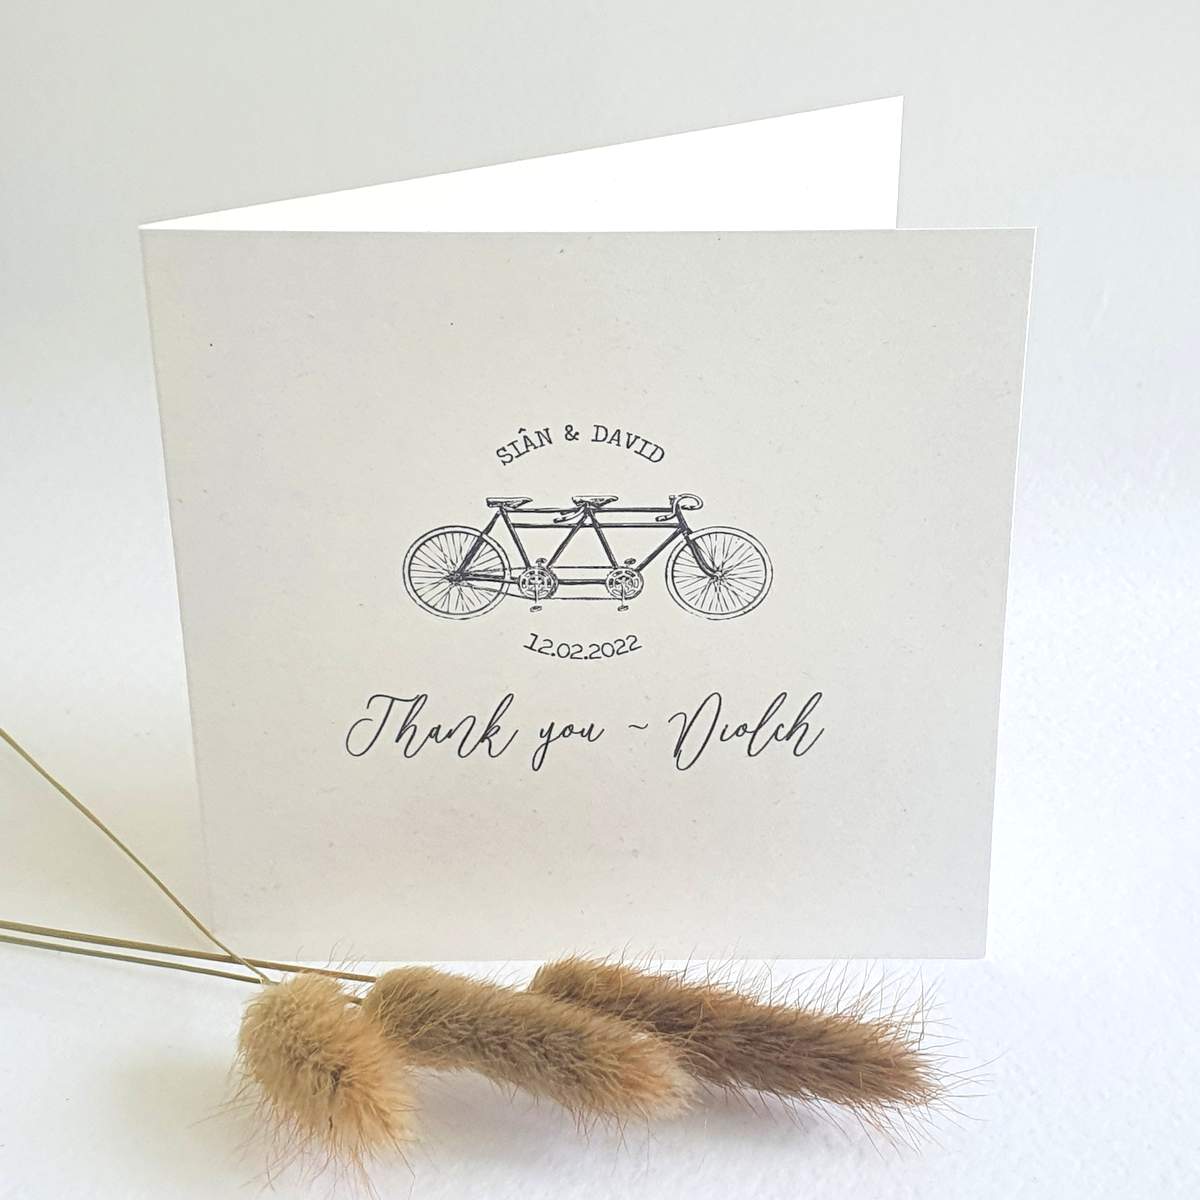 bespoke wedding thank you card featuring a bicycle motif